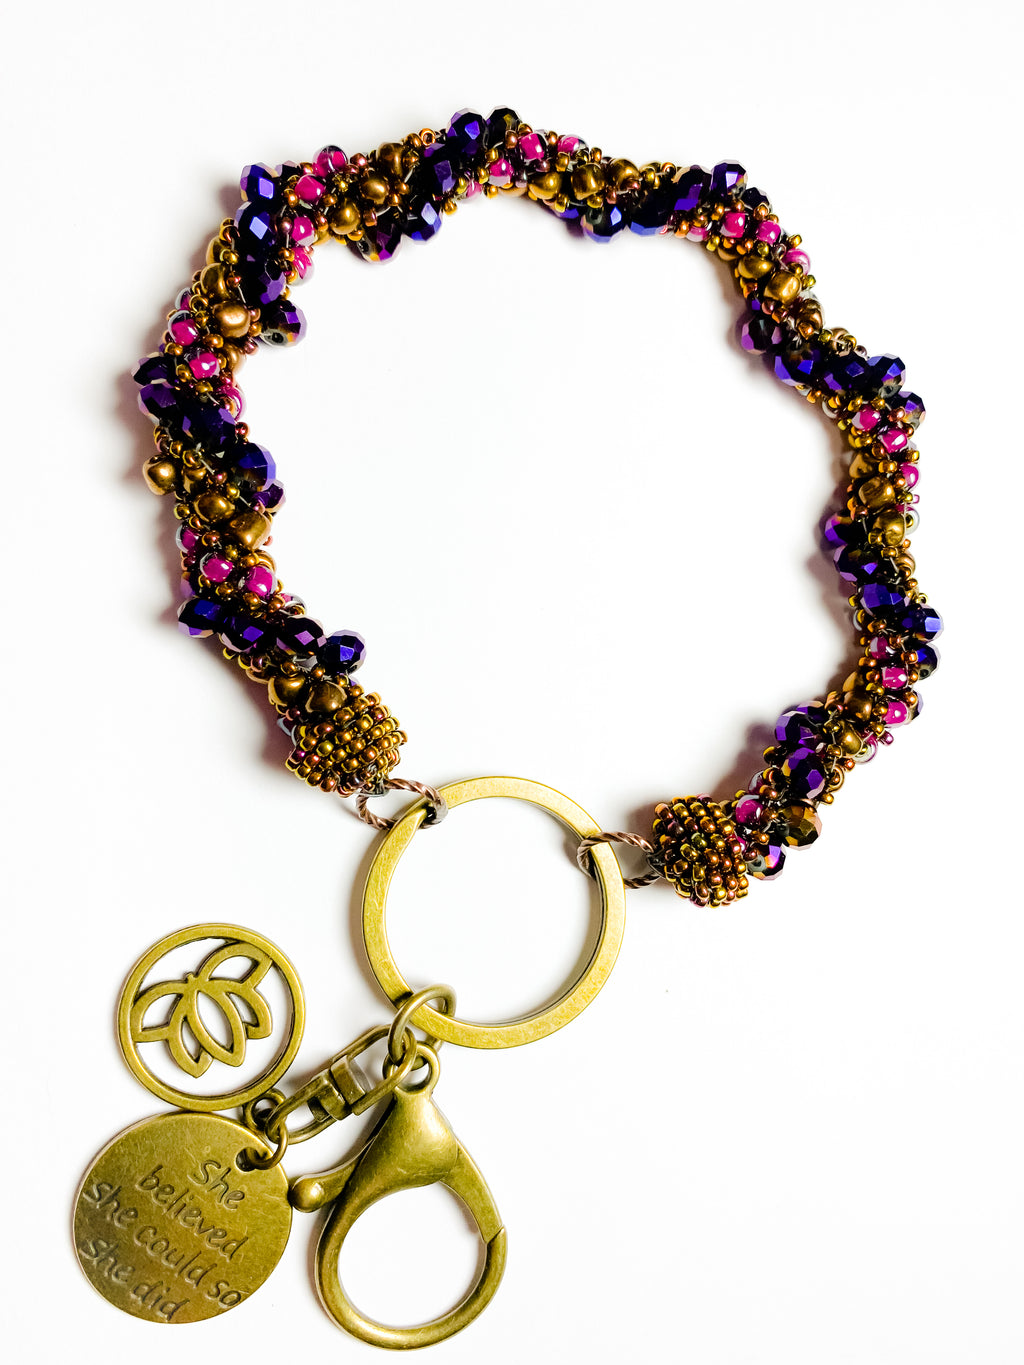 Affirmation Key Keeper - "She believed she could so she did" Purple Metalic Crystals, magenta  & Bronze Seed Beads